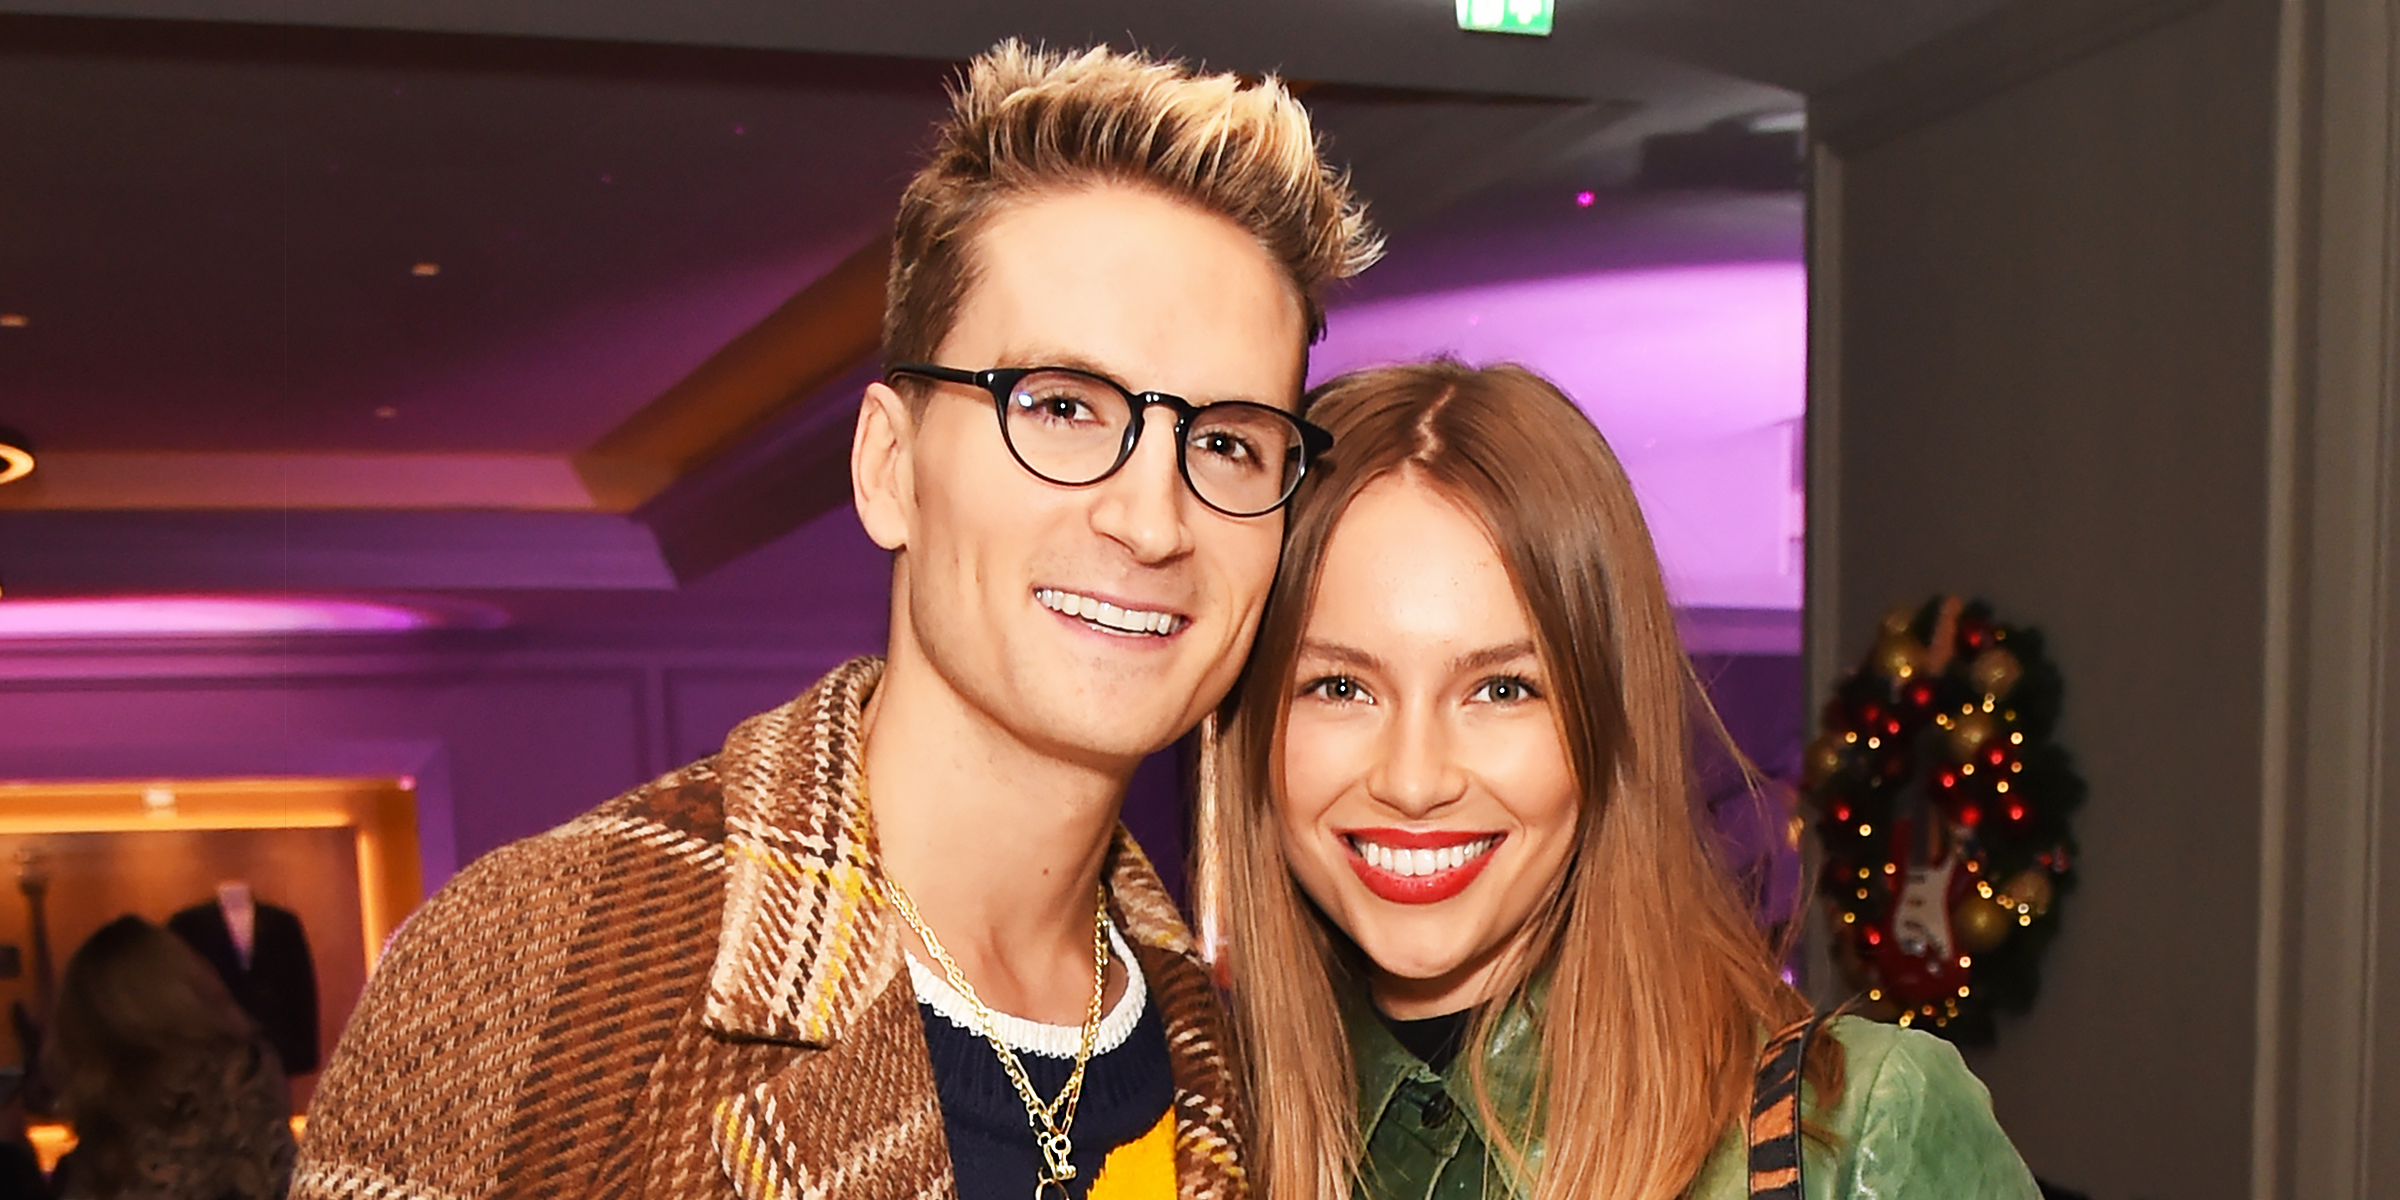 Oliver Proudlock and Emma-Louise Connolly | Source: Getty Images